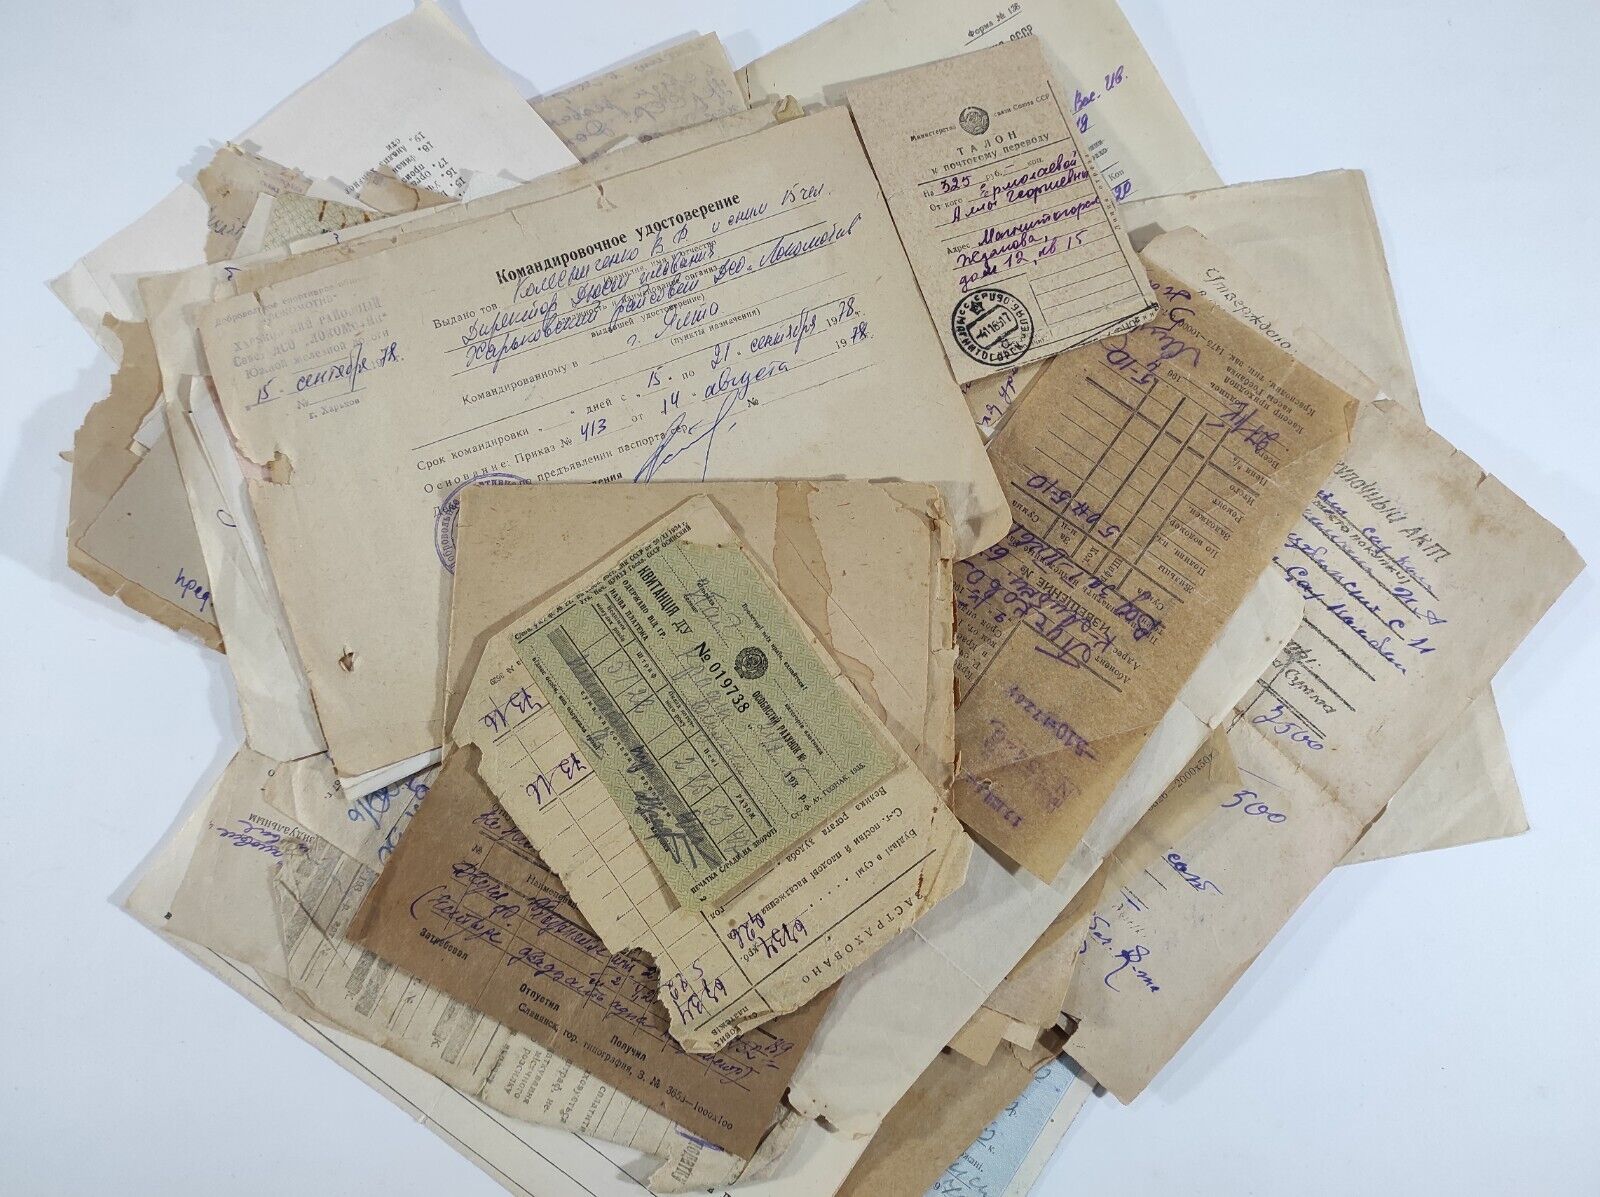 50 Soviet vintage receipts and other random papers 1920s-1980s